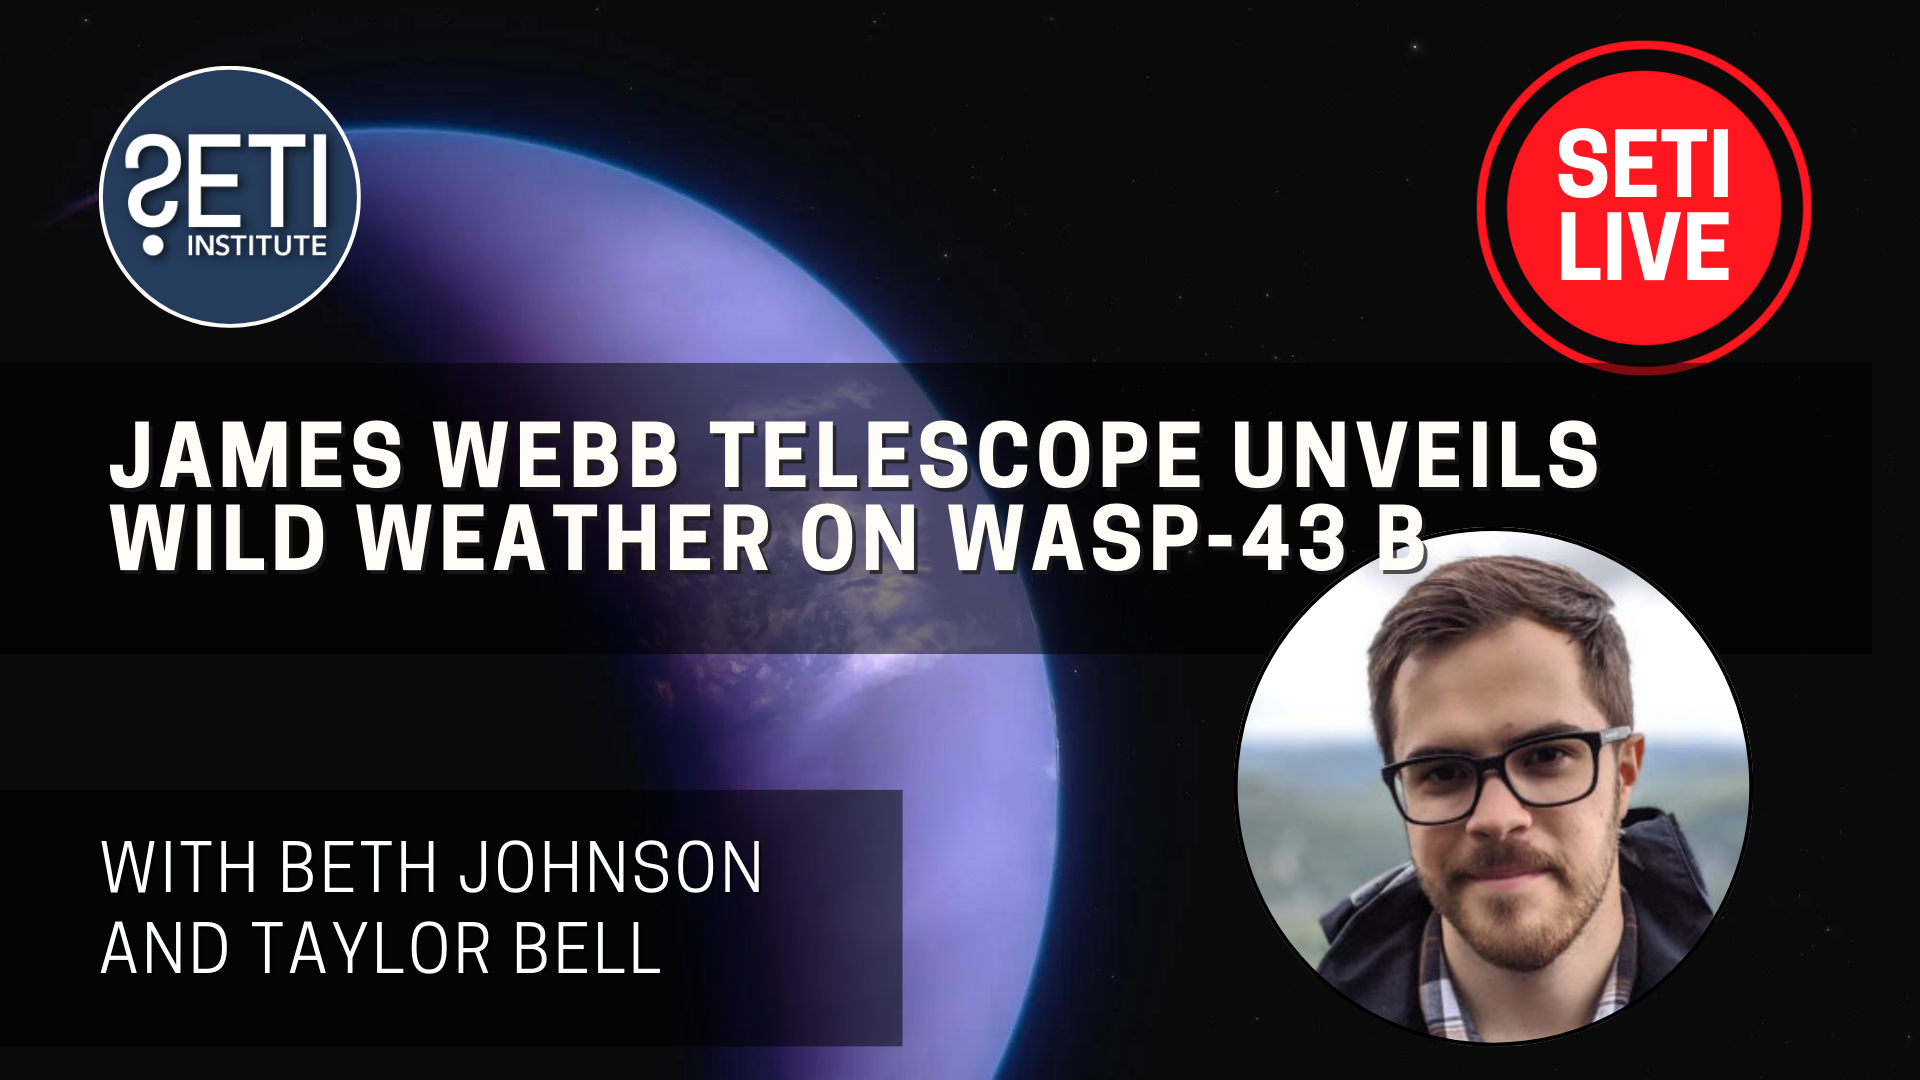 Weather on WASP43 b